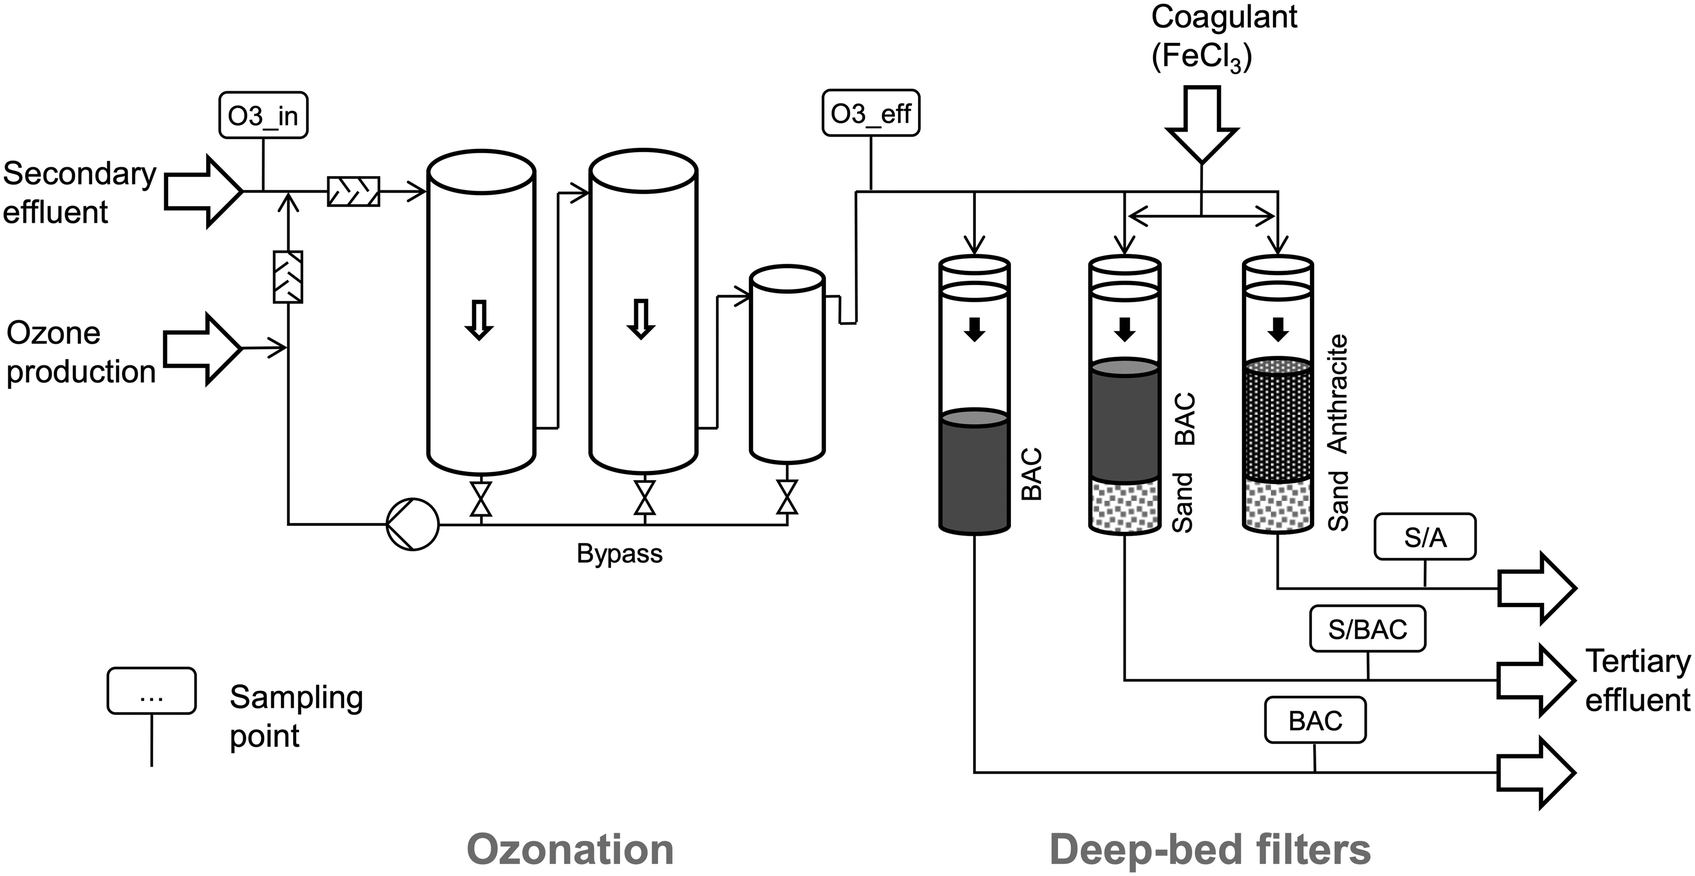 Deep Bed Filters As Post Treatment For Ozonation In Tertiary Municipal Wastewater Treatment Impact Of Design And Operation On Treatment Goals Environmental Science Water Research Technology Rsc Publishing